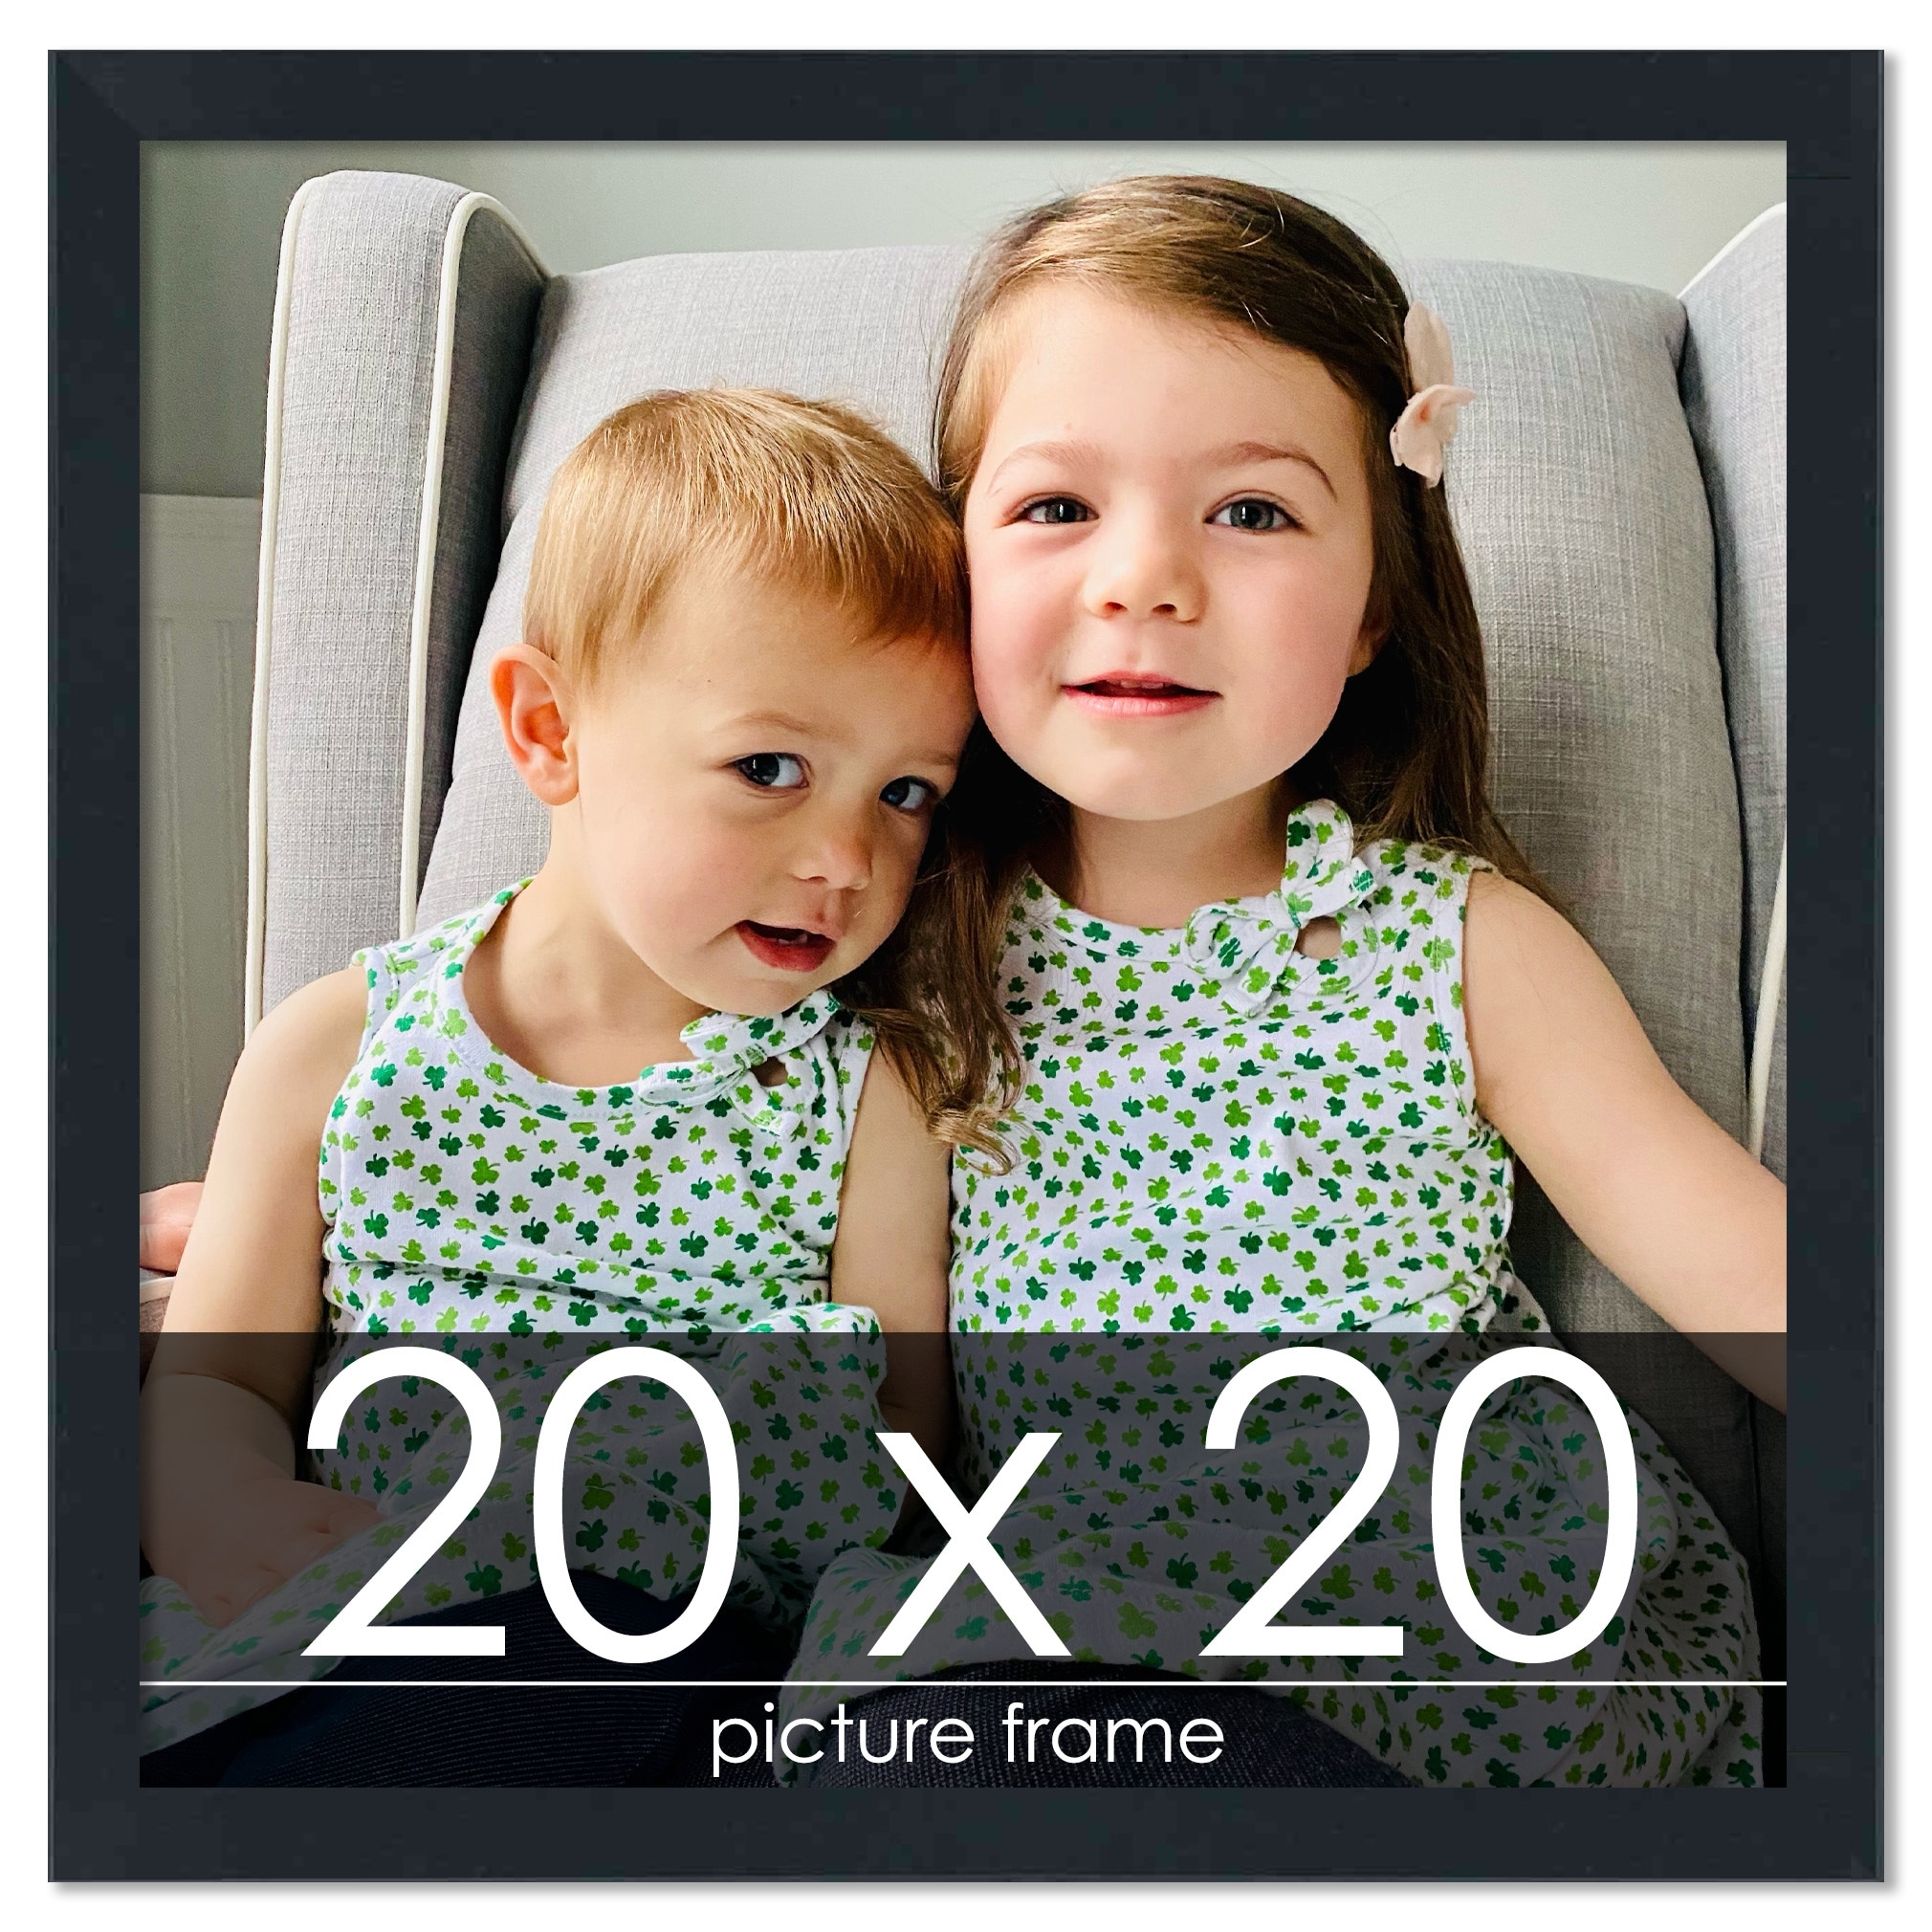 Poster Palooza 20x20 Frame Black Solid Wood Picture Frame Includes UV  Acrylic, Foam Board Backing & Hanging Hardware